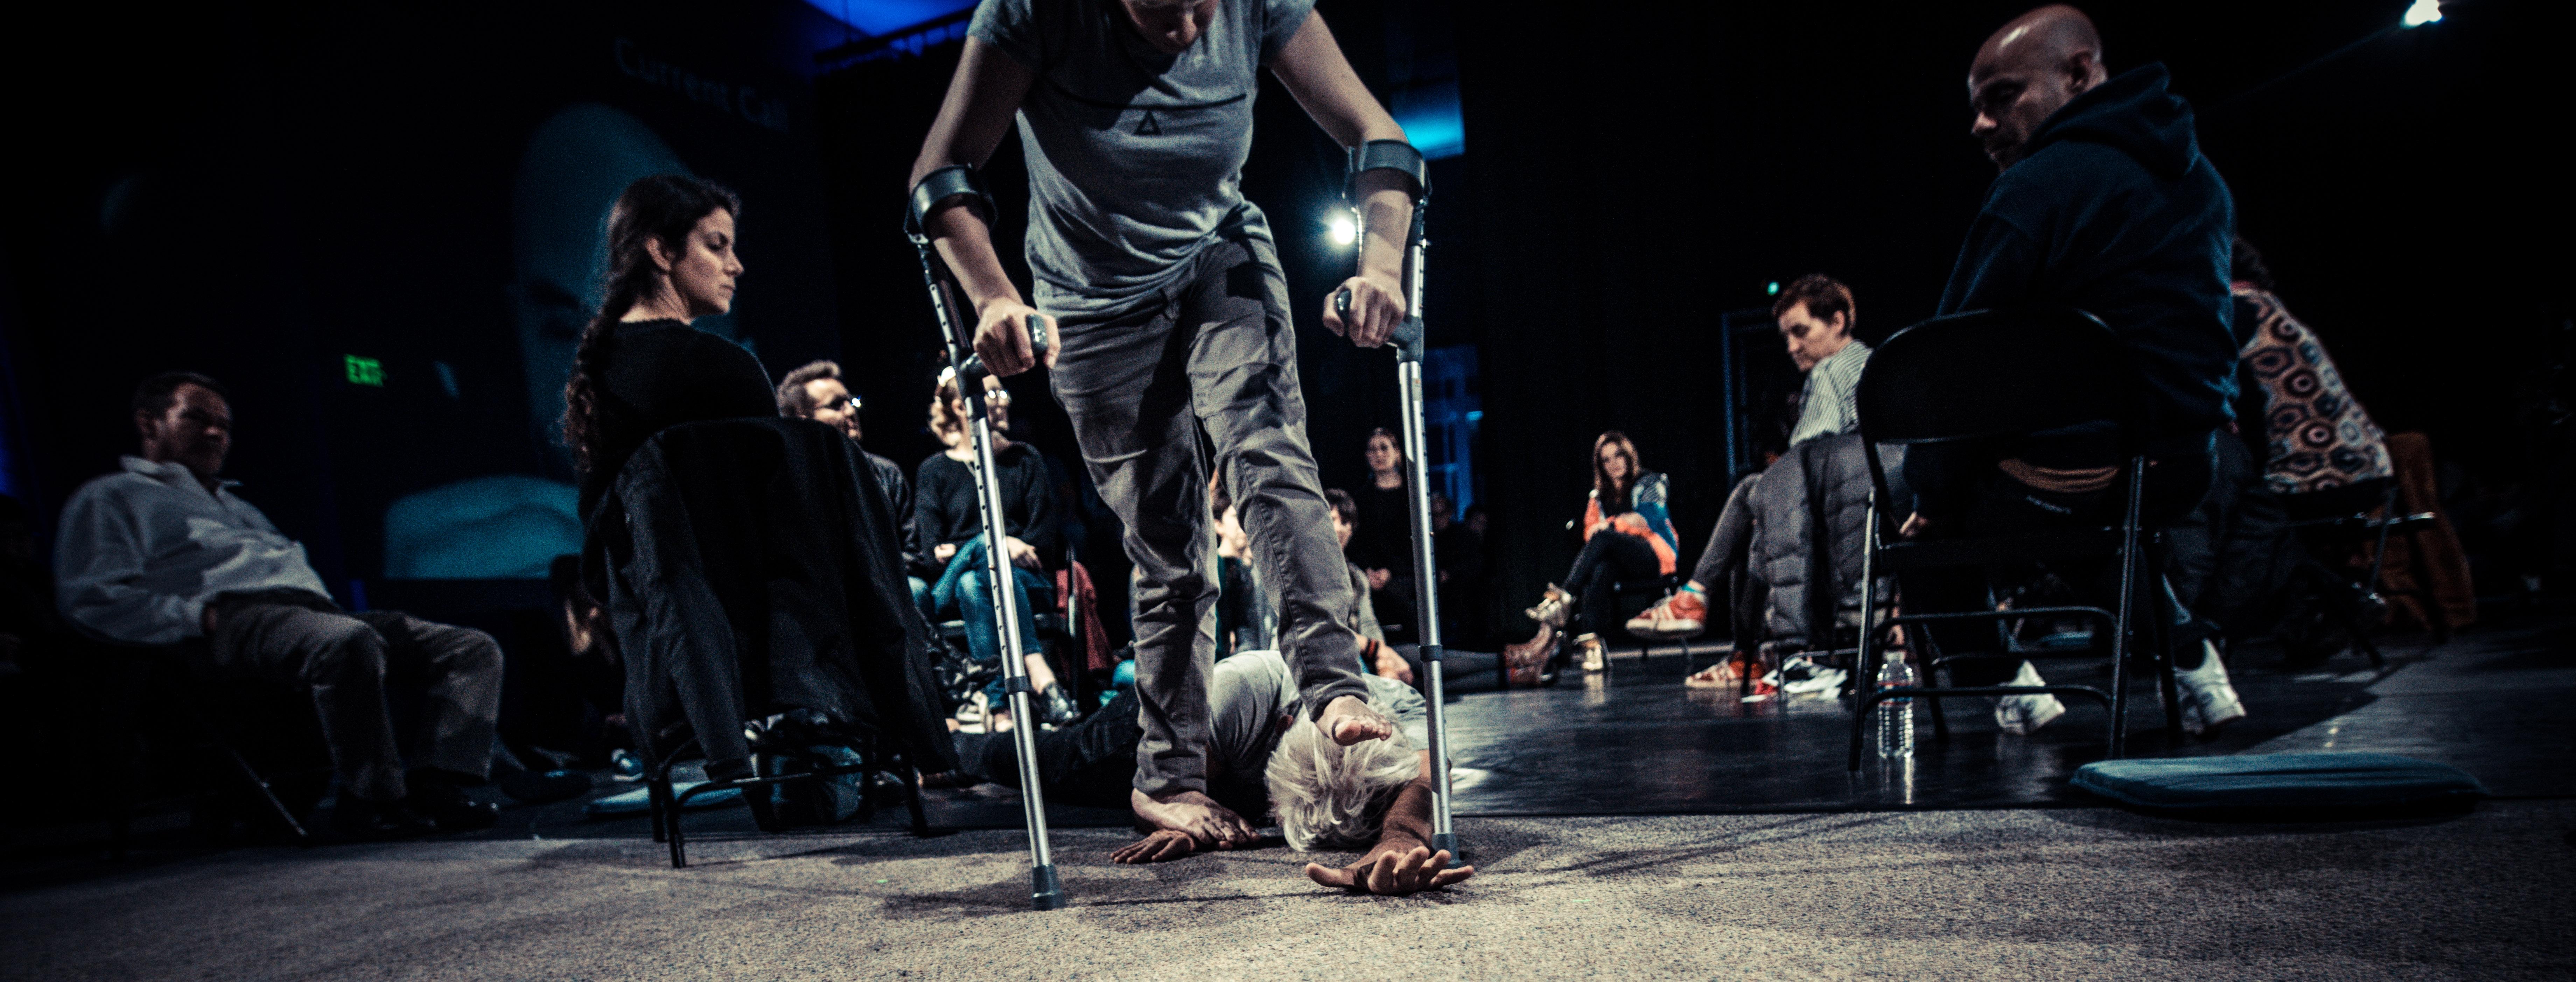 People seated on a darkened stage watch as a woman using crutches steps on and walks over a man, who lies on the ground.